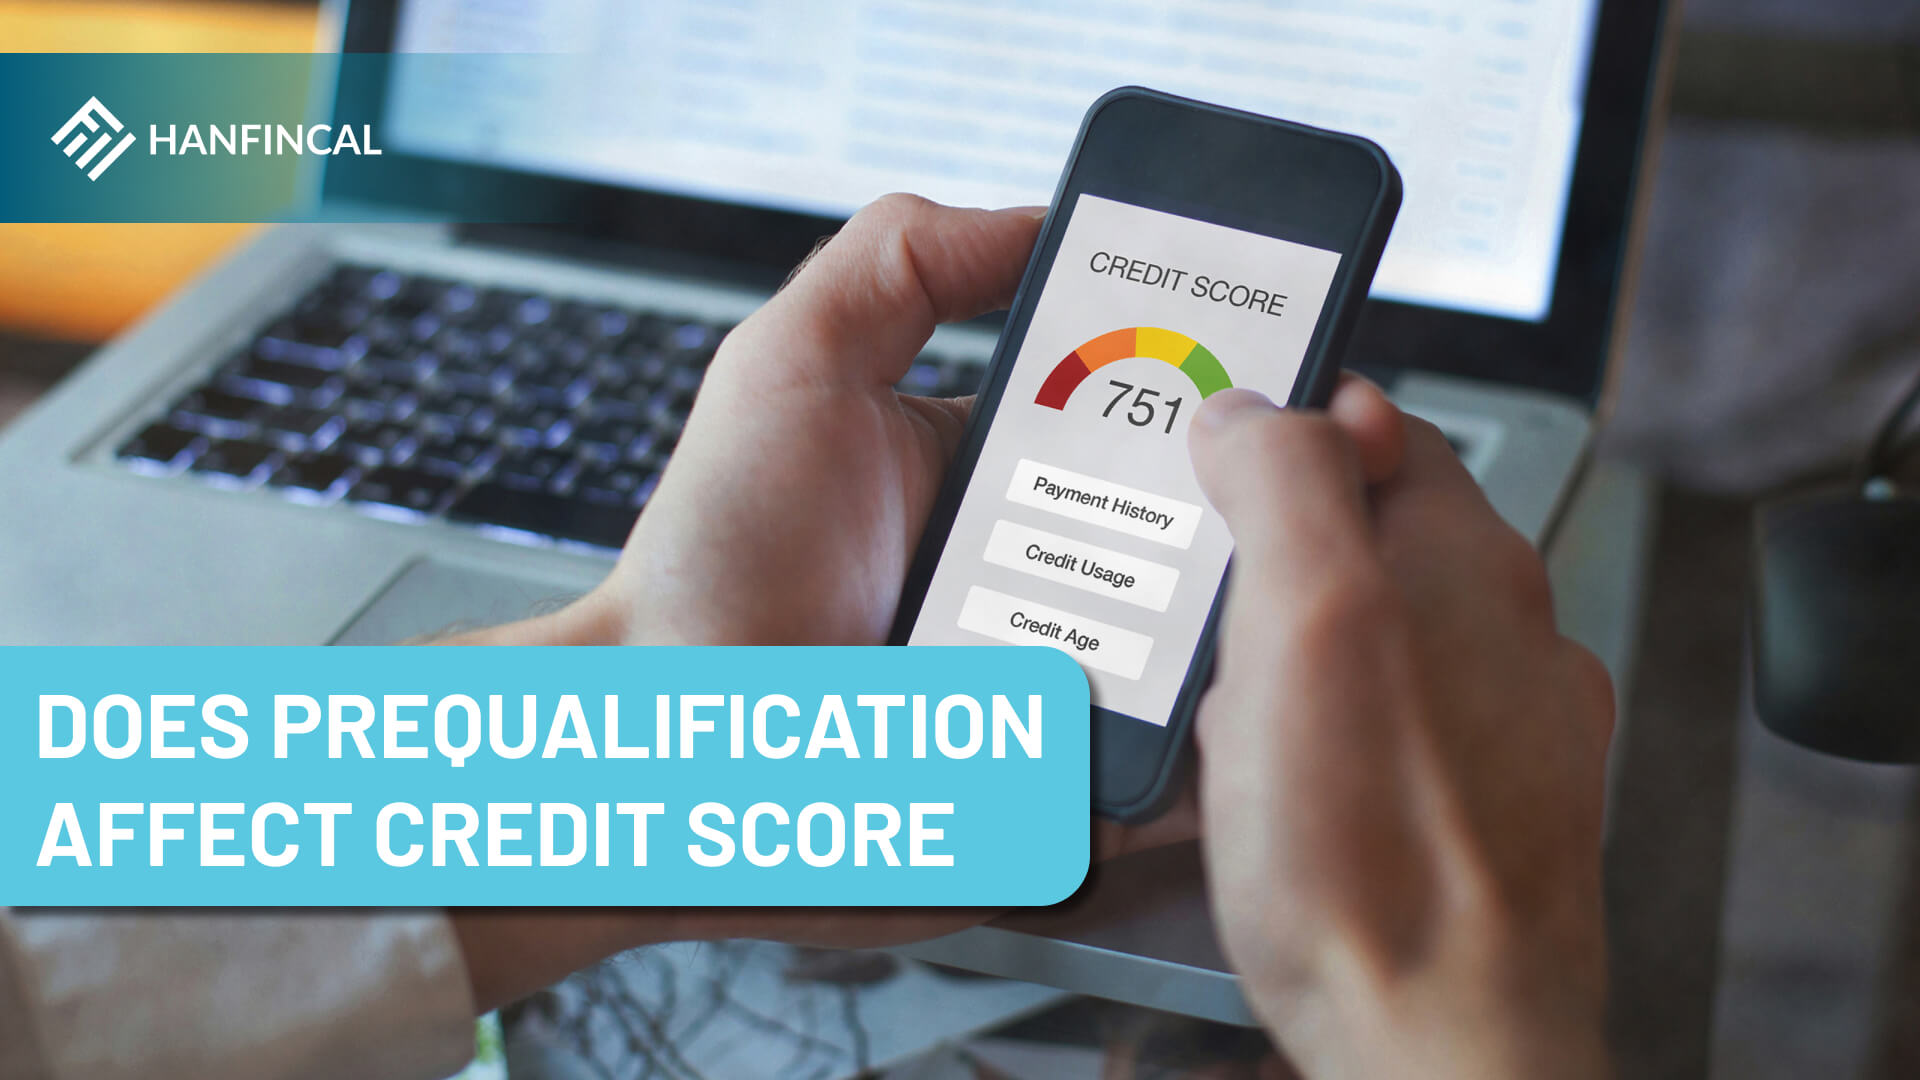 Does prequalification affect credit score?